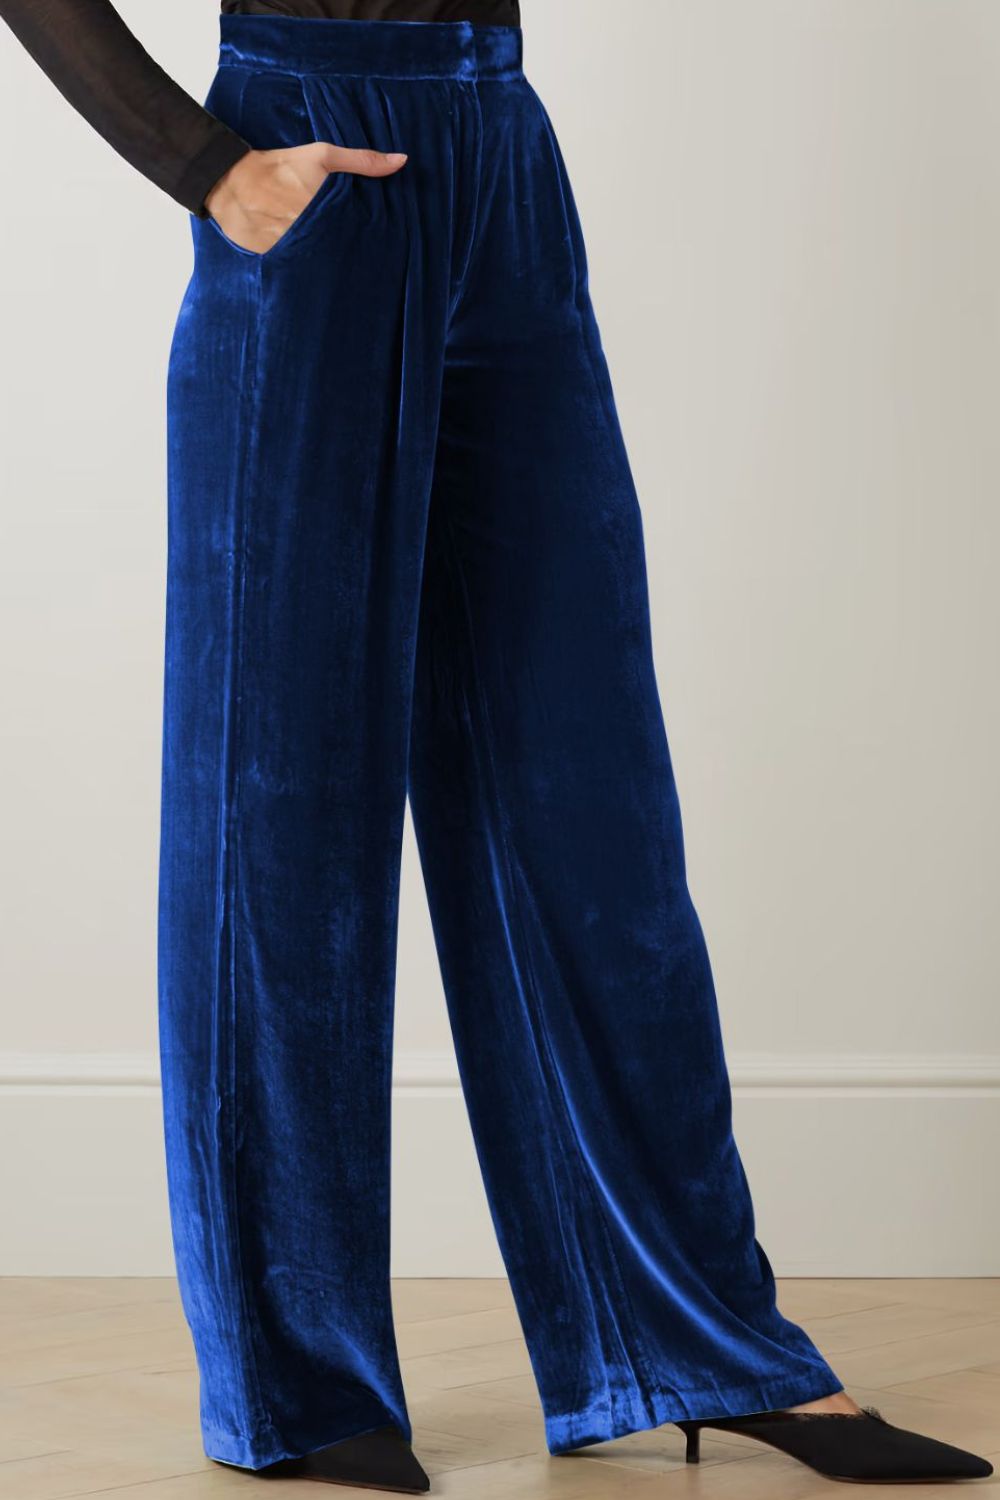 Loose Fit High Waist Long Pants with Pockets - Bottoms - Pants - 13 - 2024